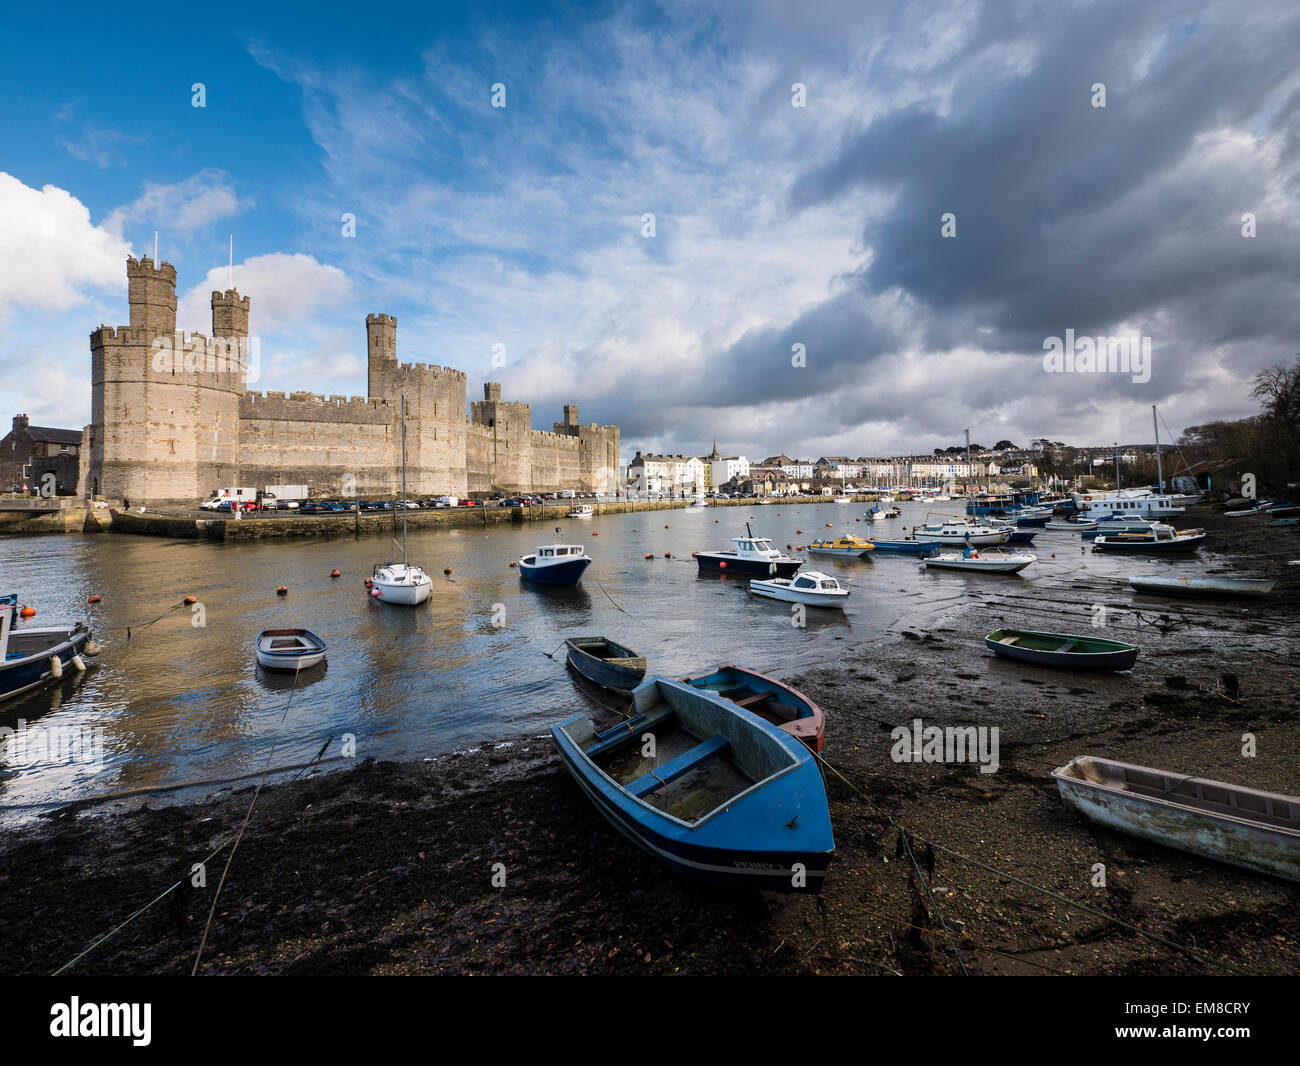 Caernarfon Castle, North Wales seen from across the River Seiont Stock Photo